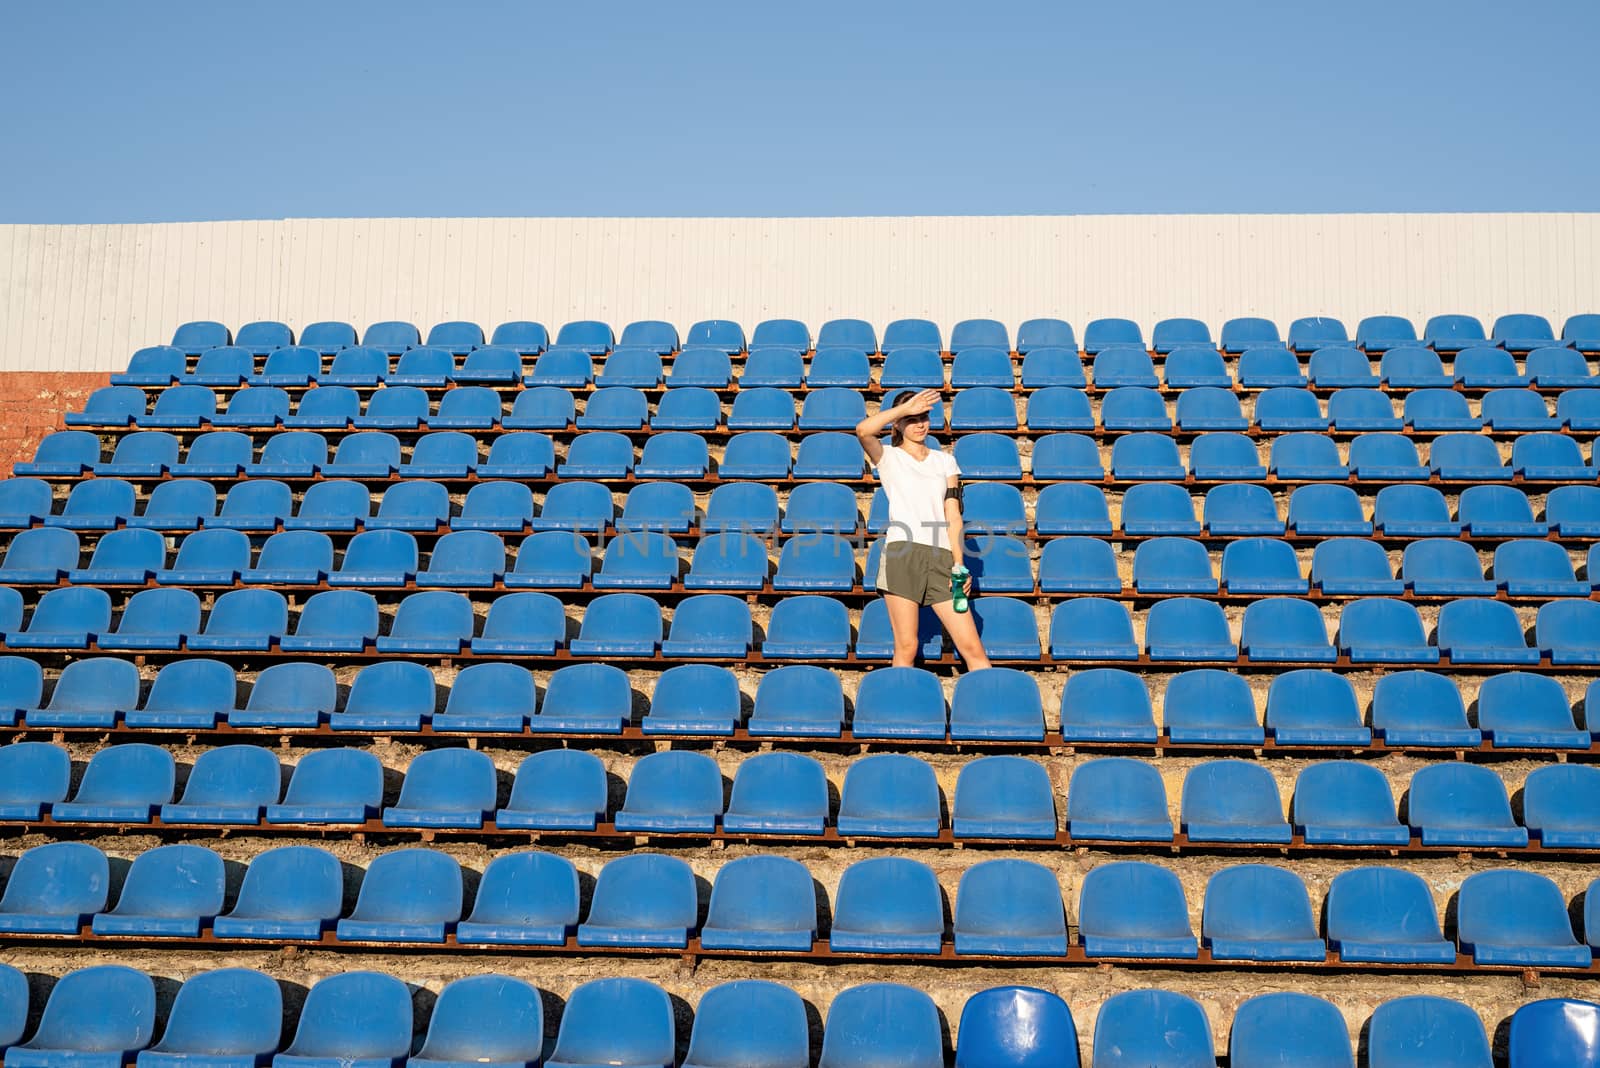 Healthy lifestyle concept. Teenage doing sports alone at the empty stadium